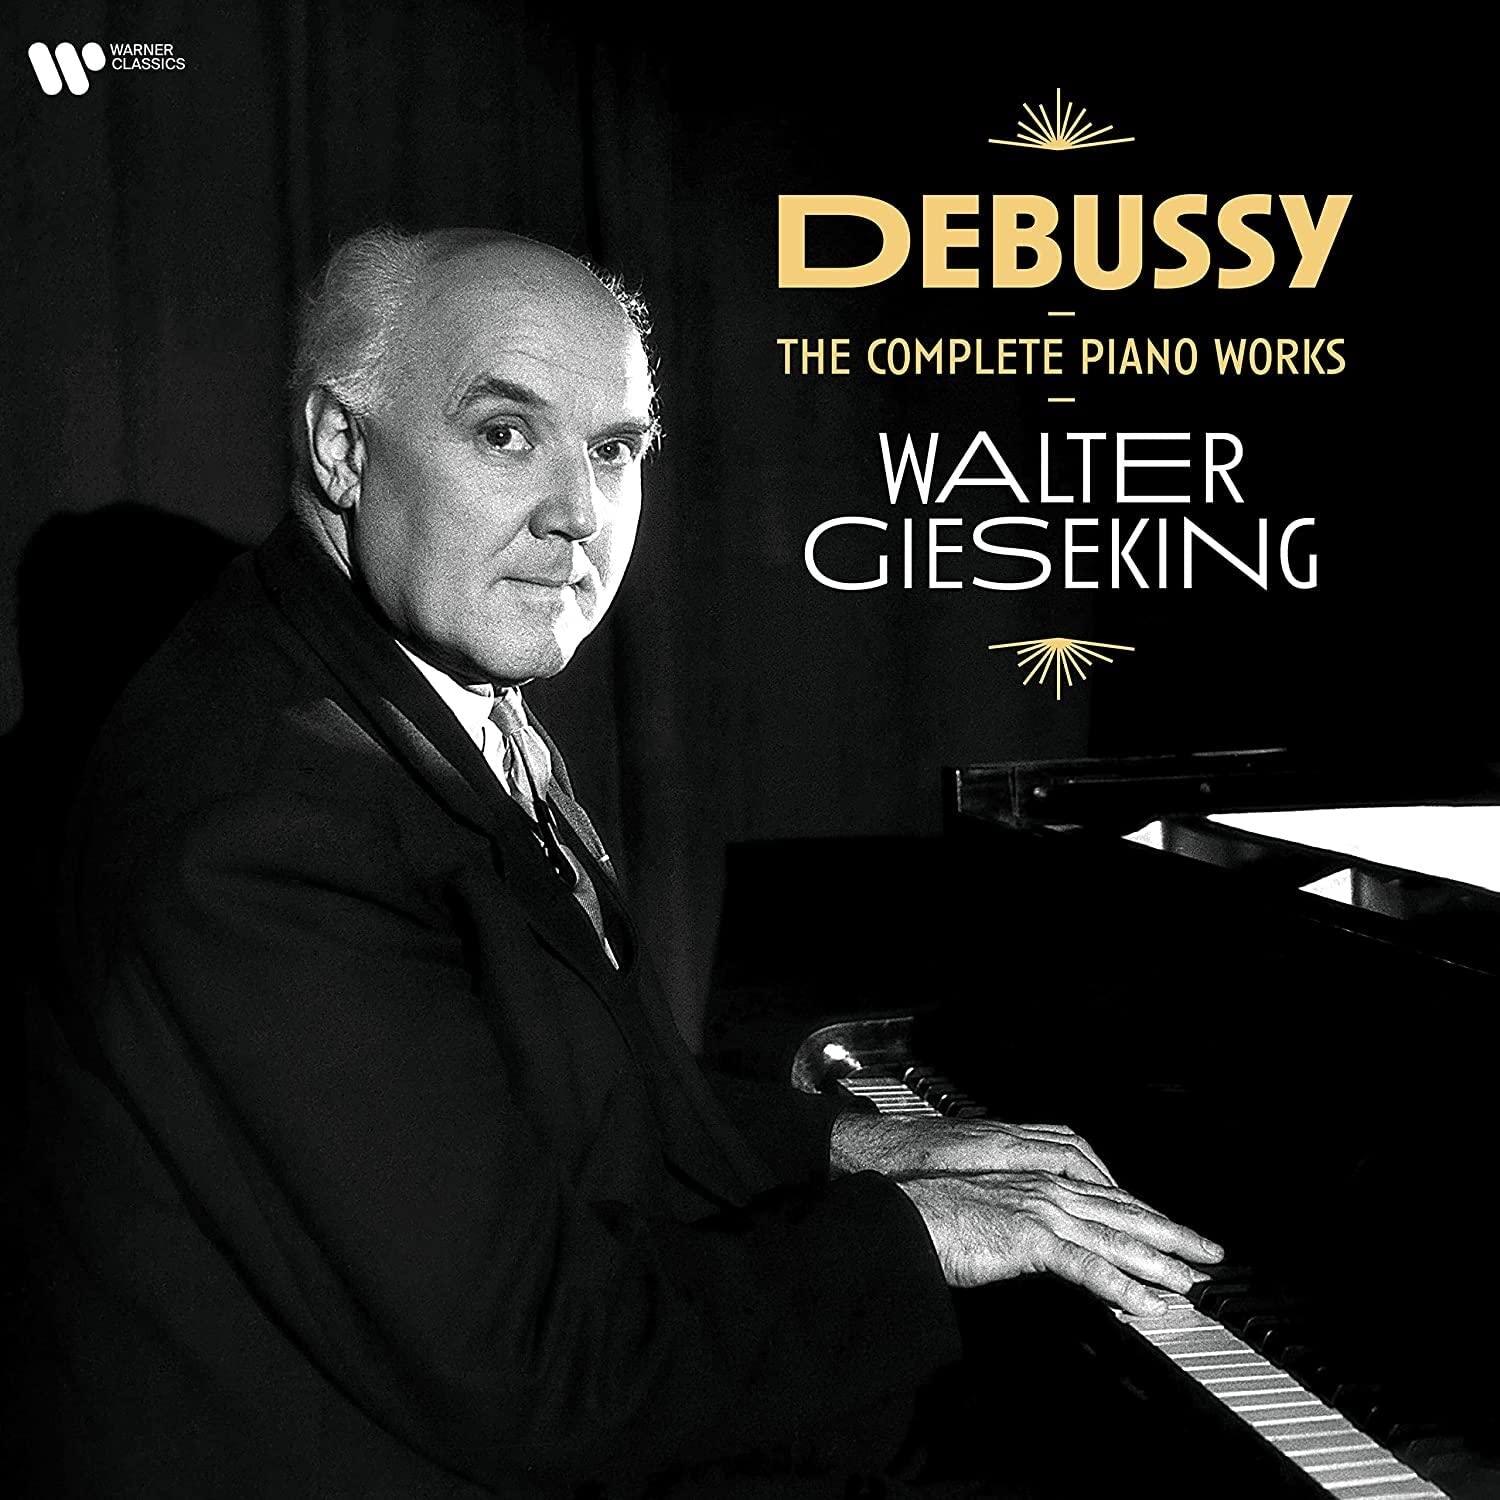 Виниловая Пластинка Walter Gieseking, Debussy: The Complete Piano Works (0190296280436) ripaud delphine cocton marie noelle pommier emilie l atelier a1 livre dvd